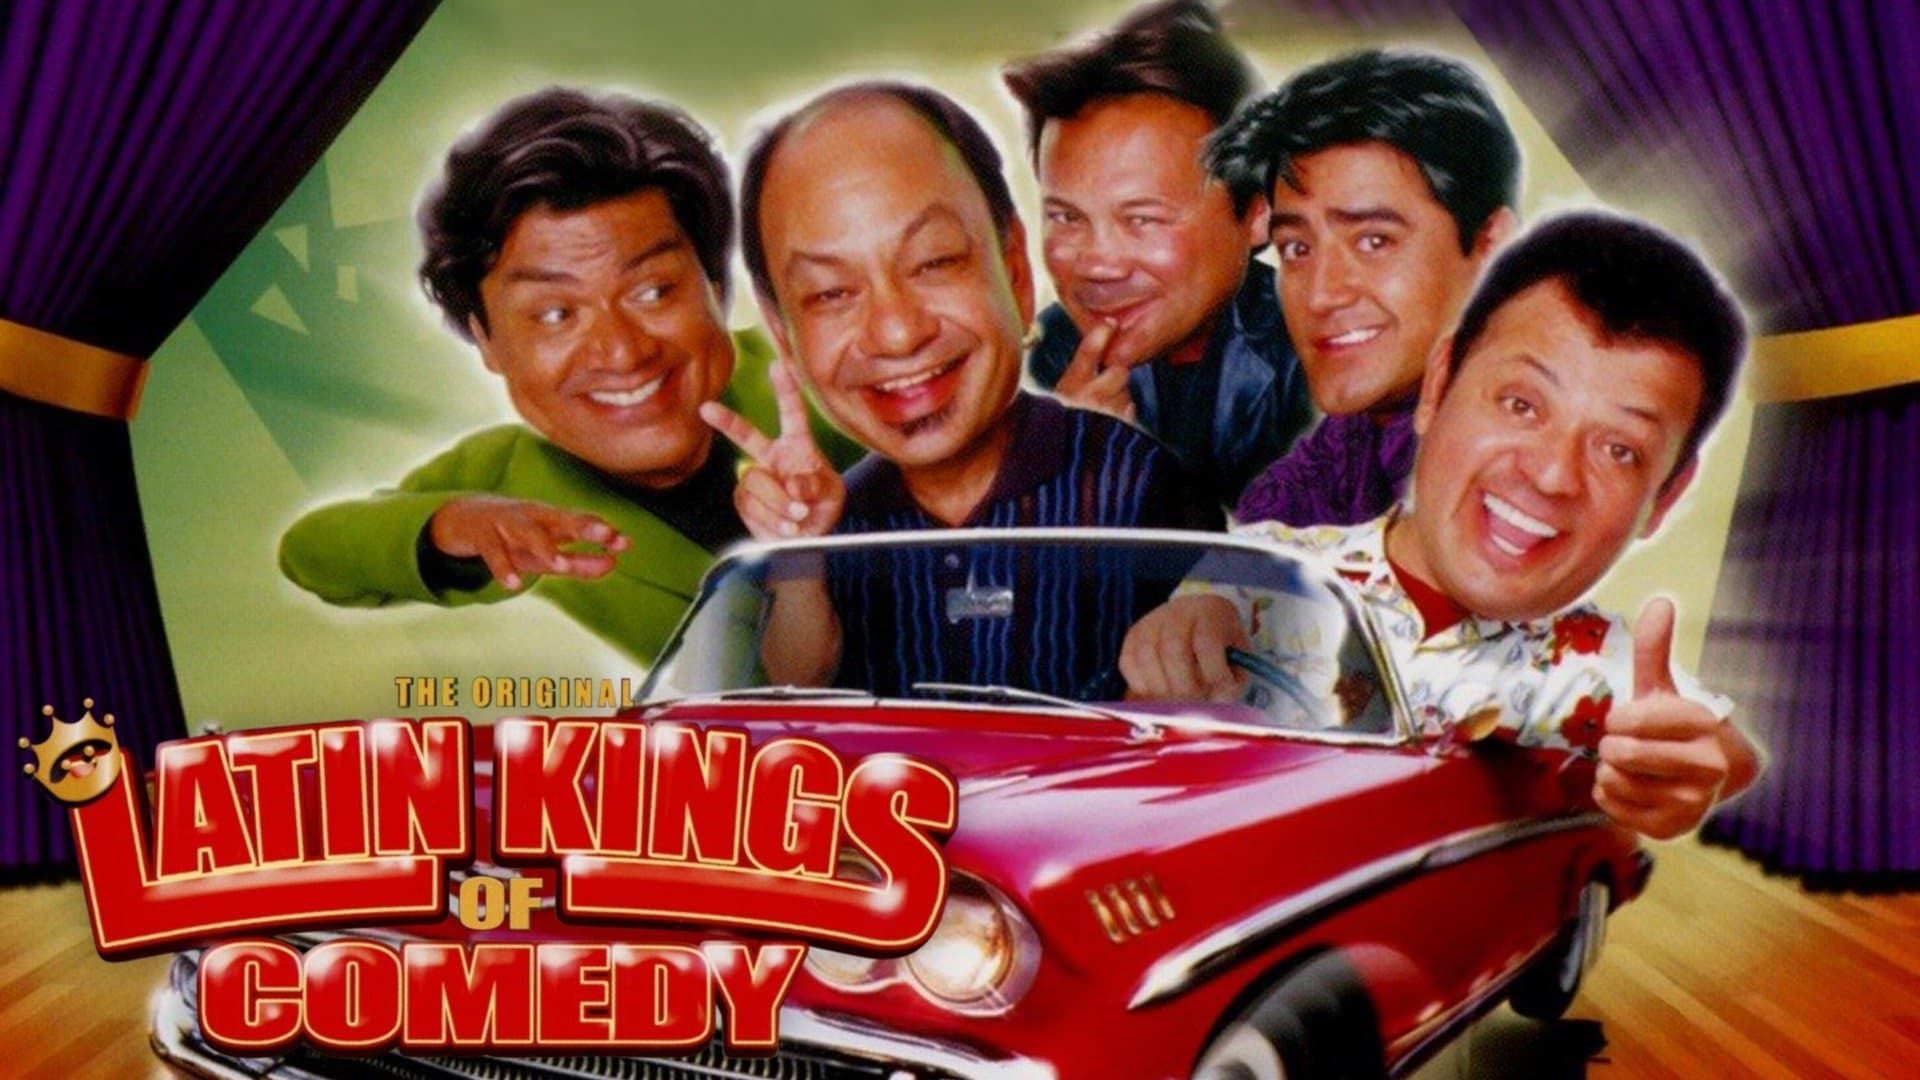 The Original Latin Kings of Comedy background